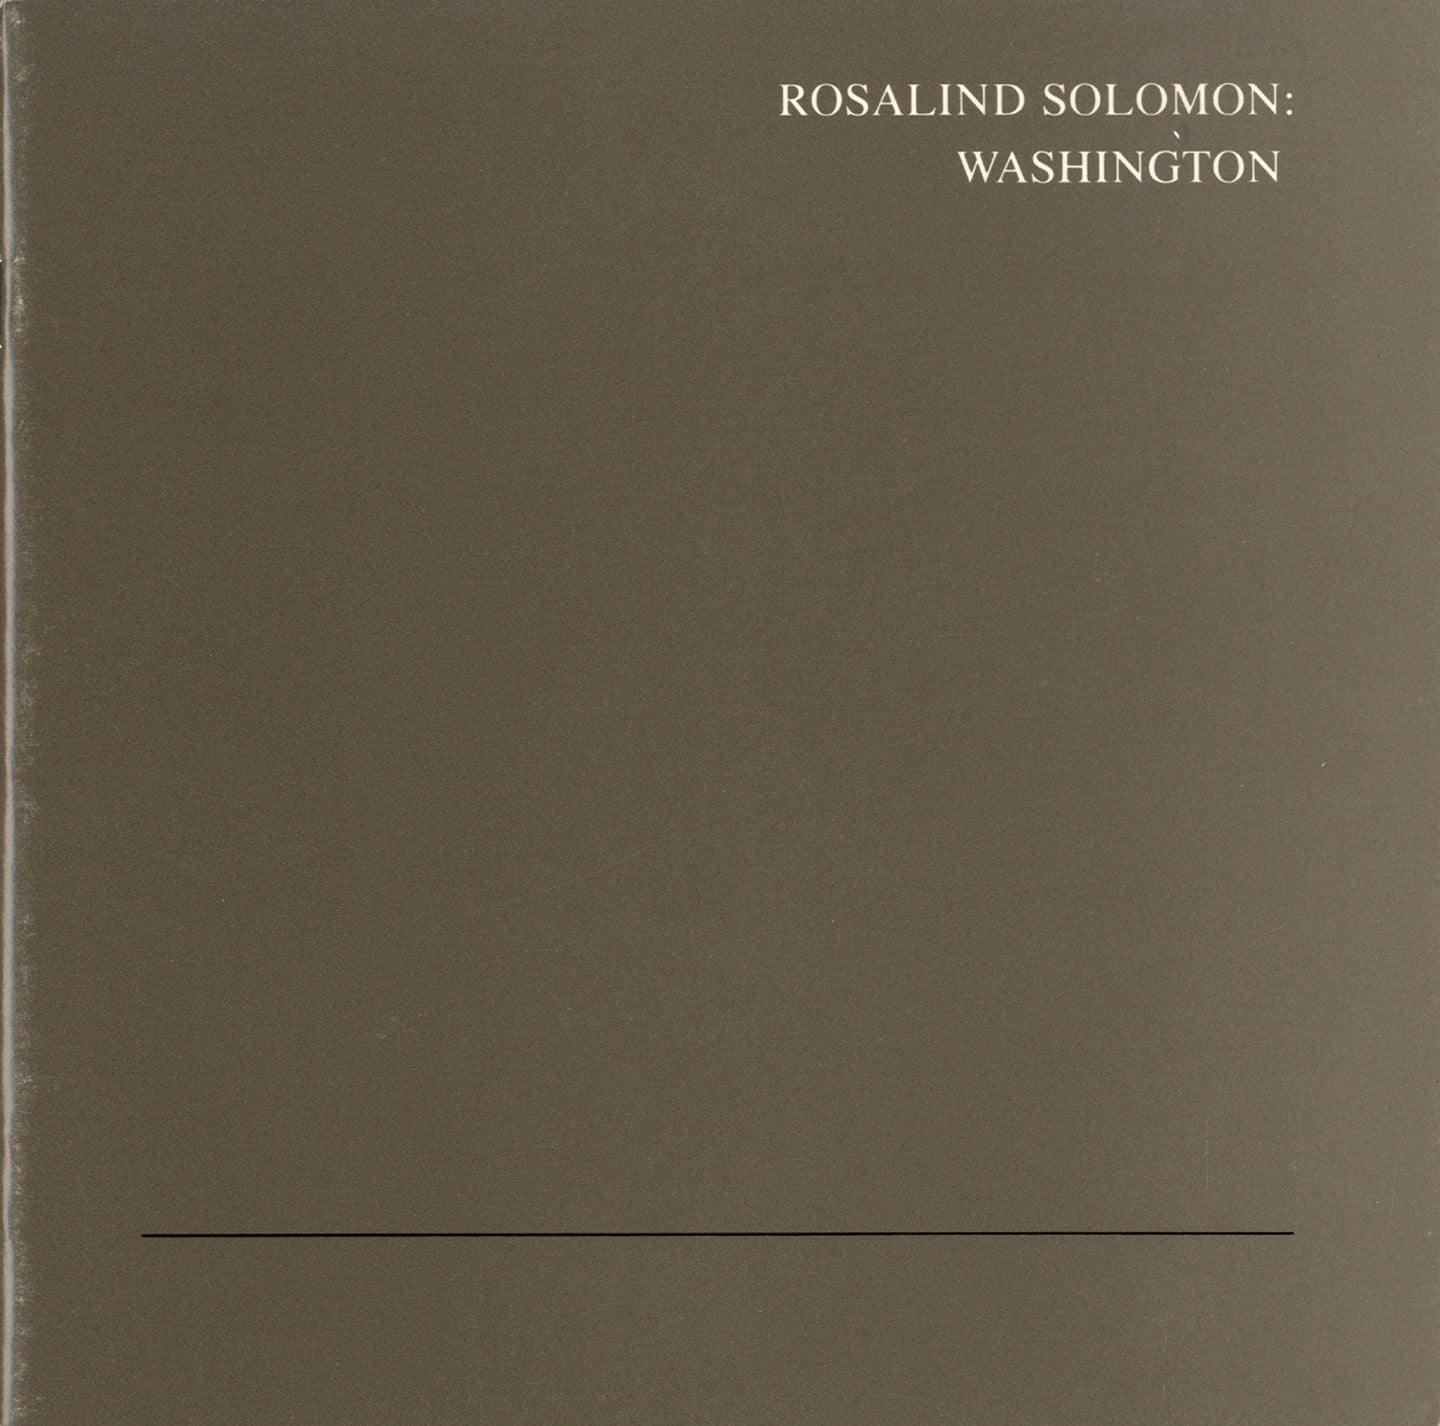 Photography at the Corcoran Series, Complete Boxed Set of 27 Catalogues (Includes all 8 catalogues from "The Nation's Capital in Photographs,1976")